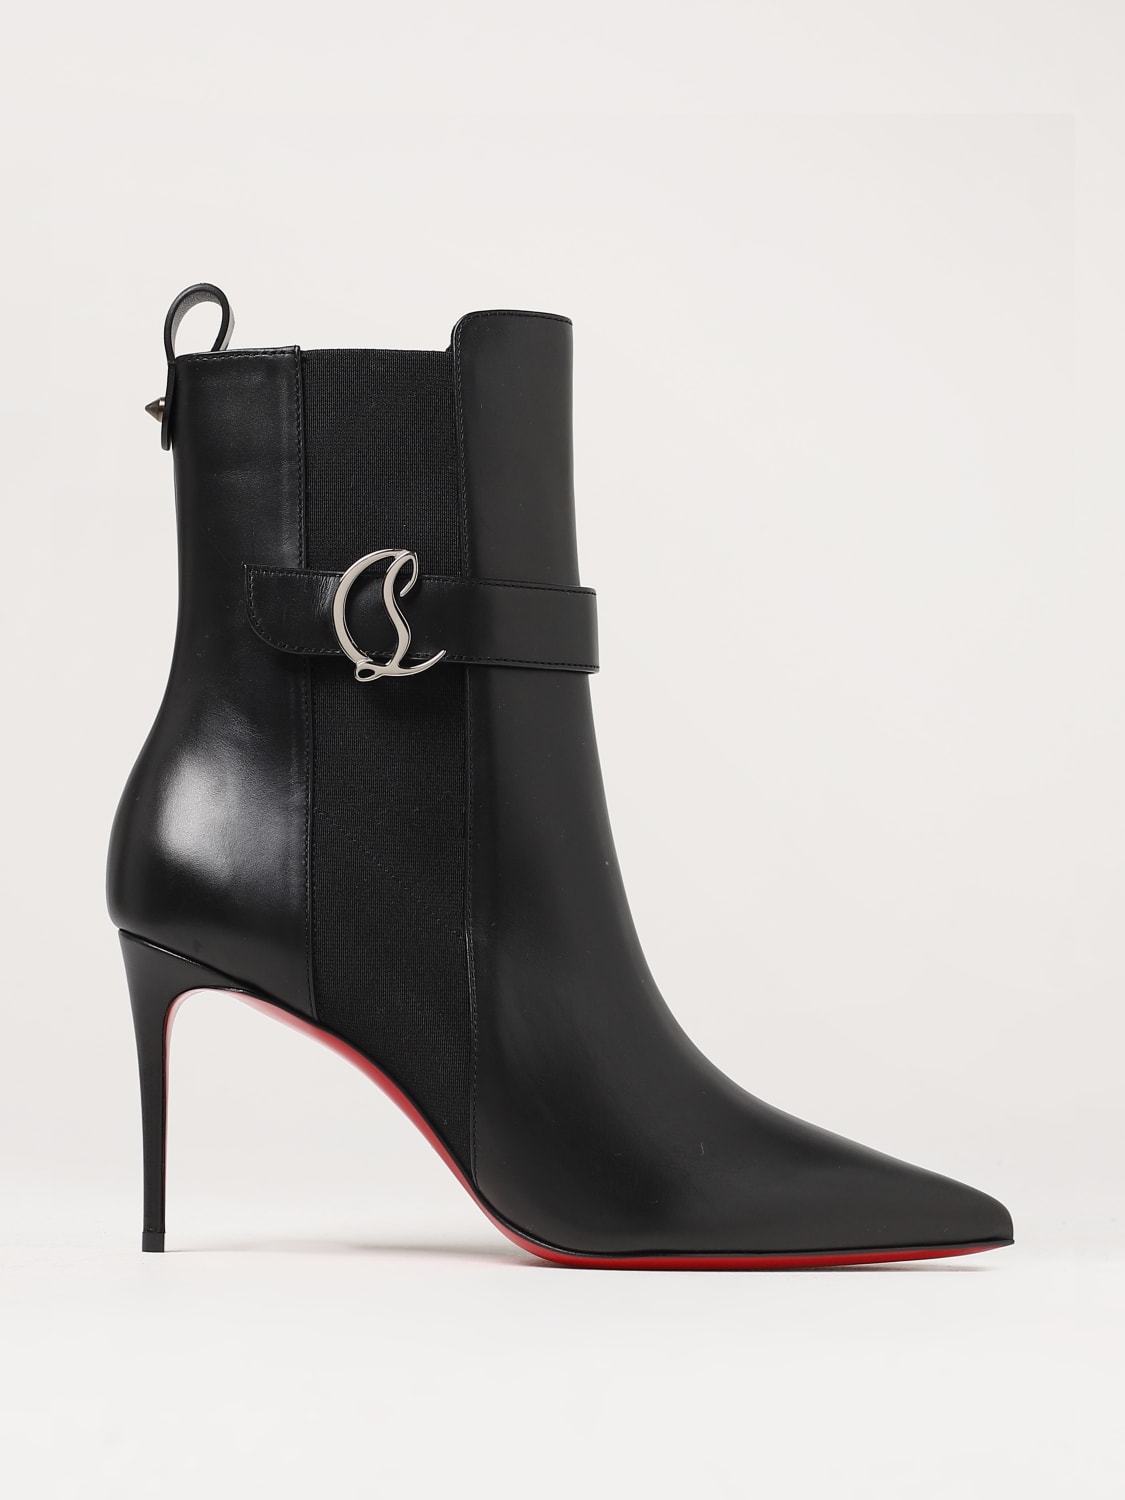 Christian Louboutin Black With My Guitar Donna 65 Ankle Boot 38.5